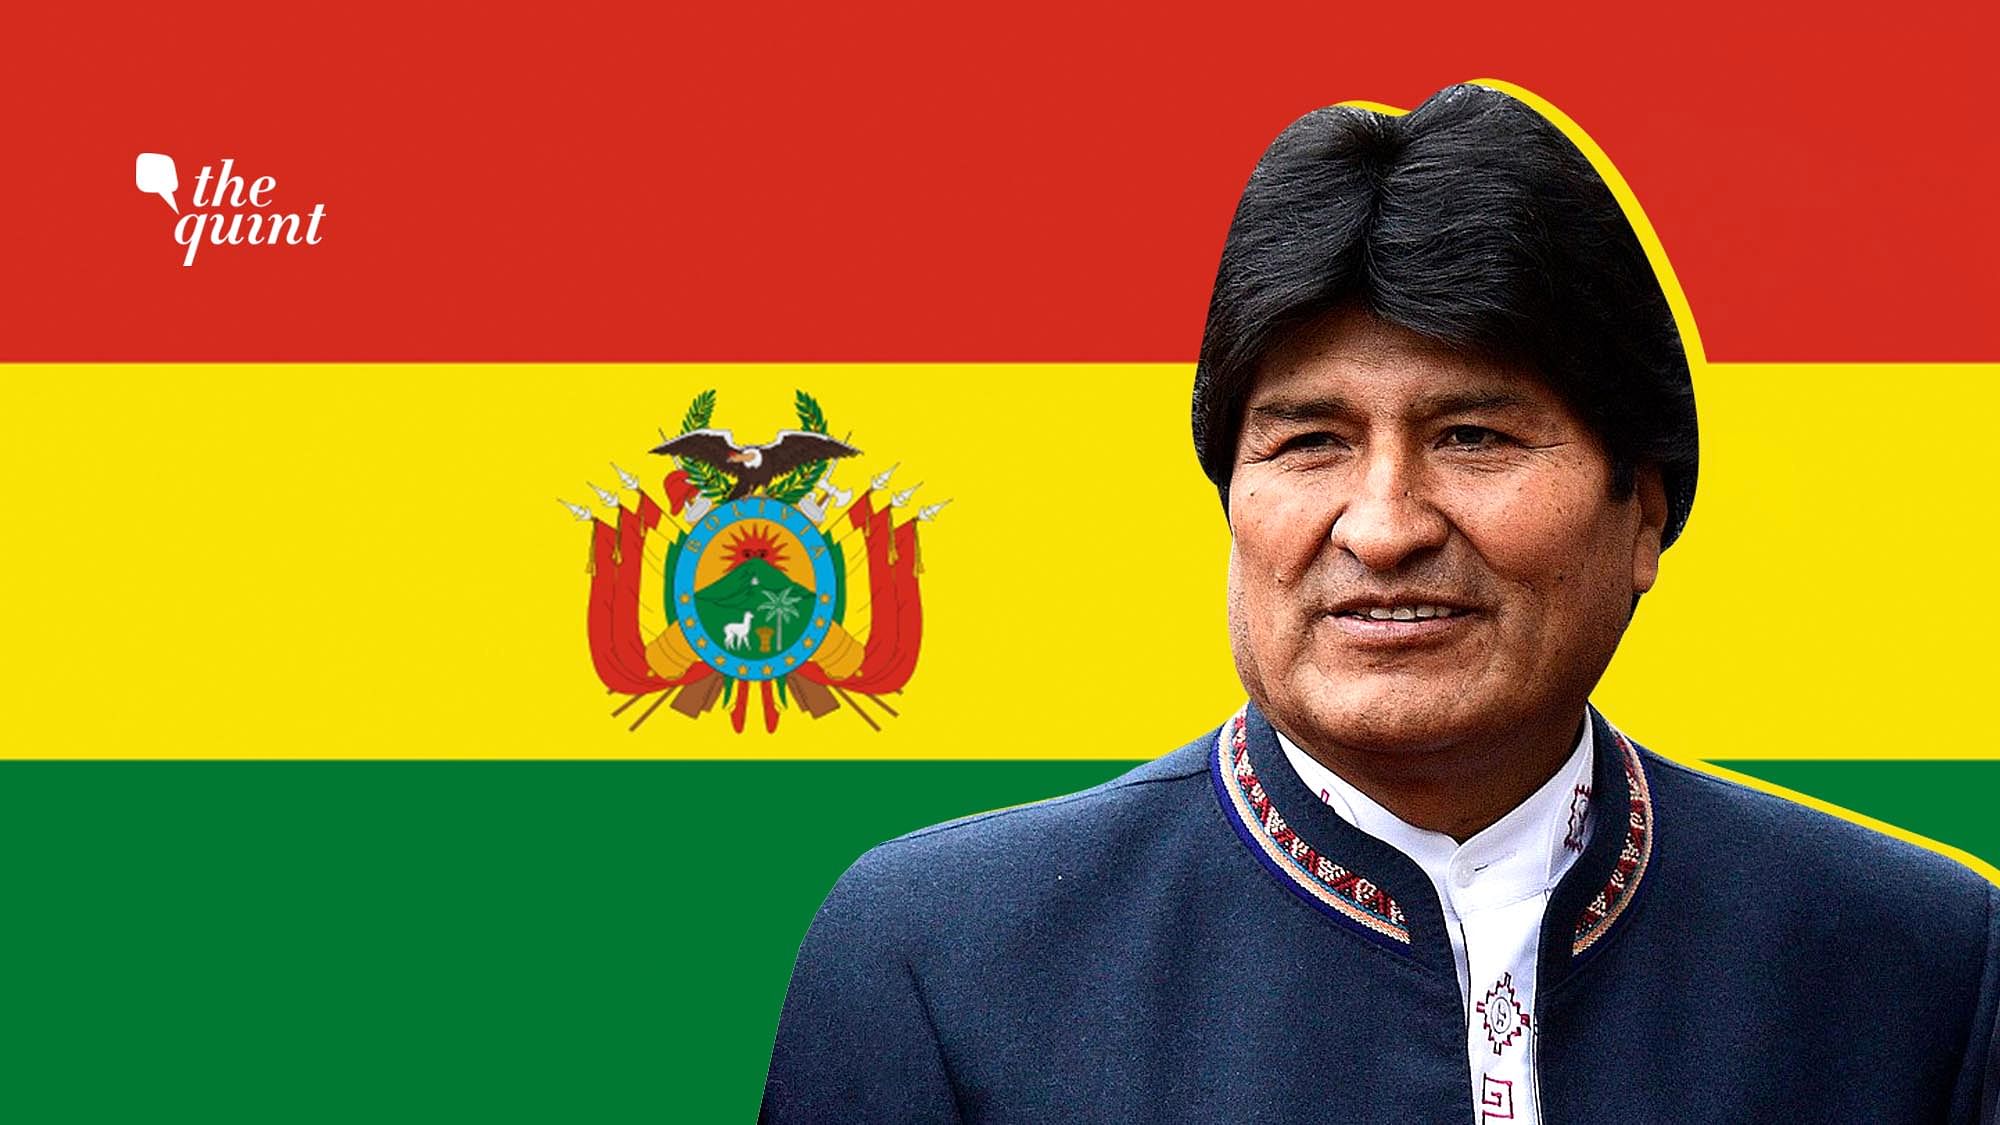 Image of Bolivian flag and ex-President Evo Morales, used for representational purposes.